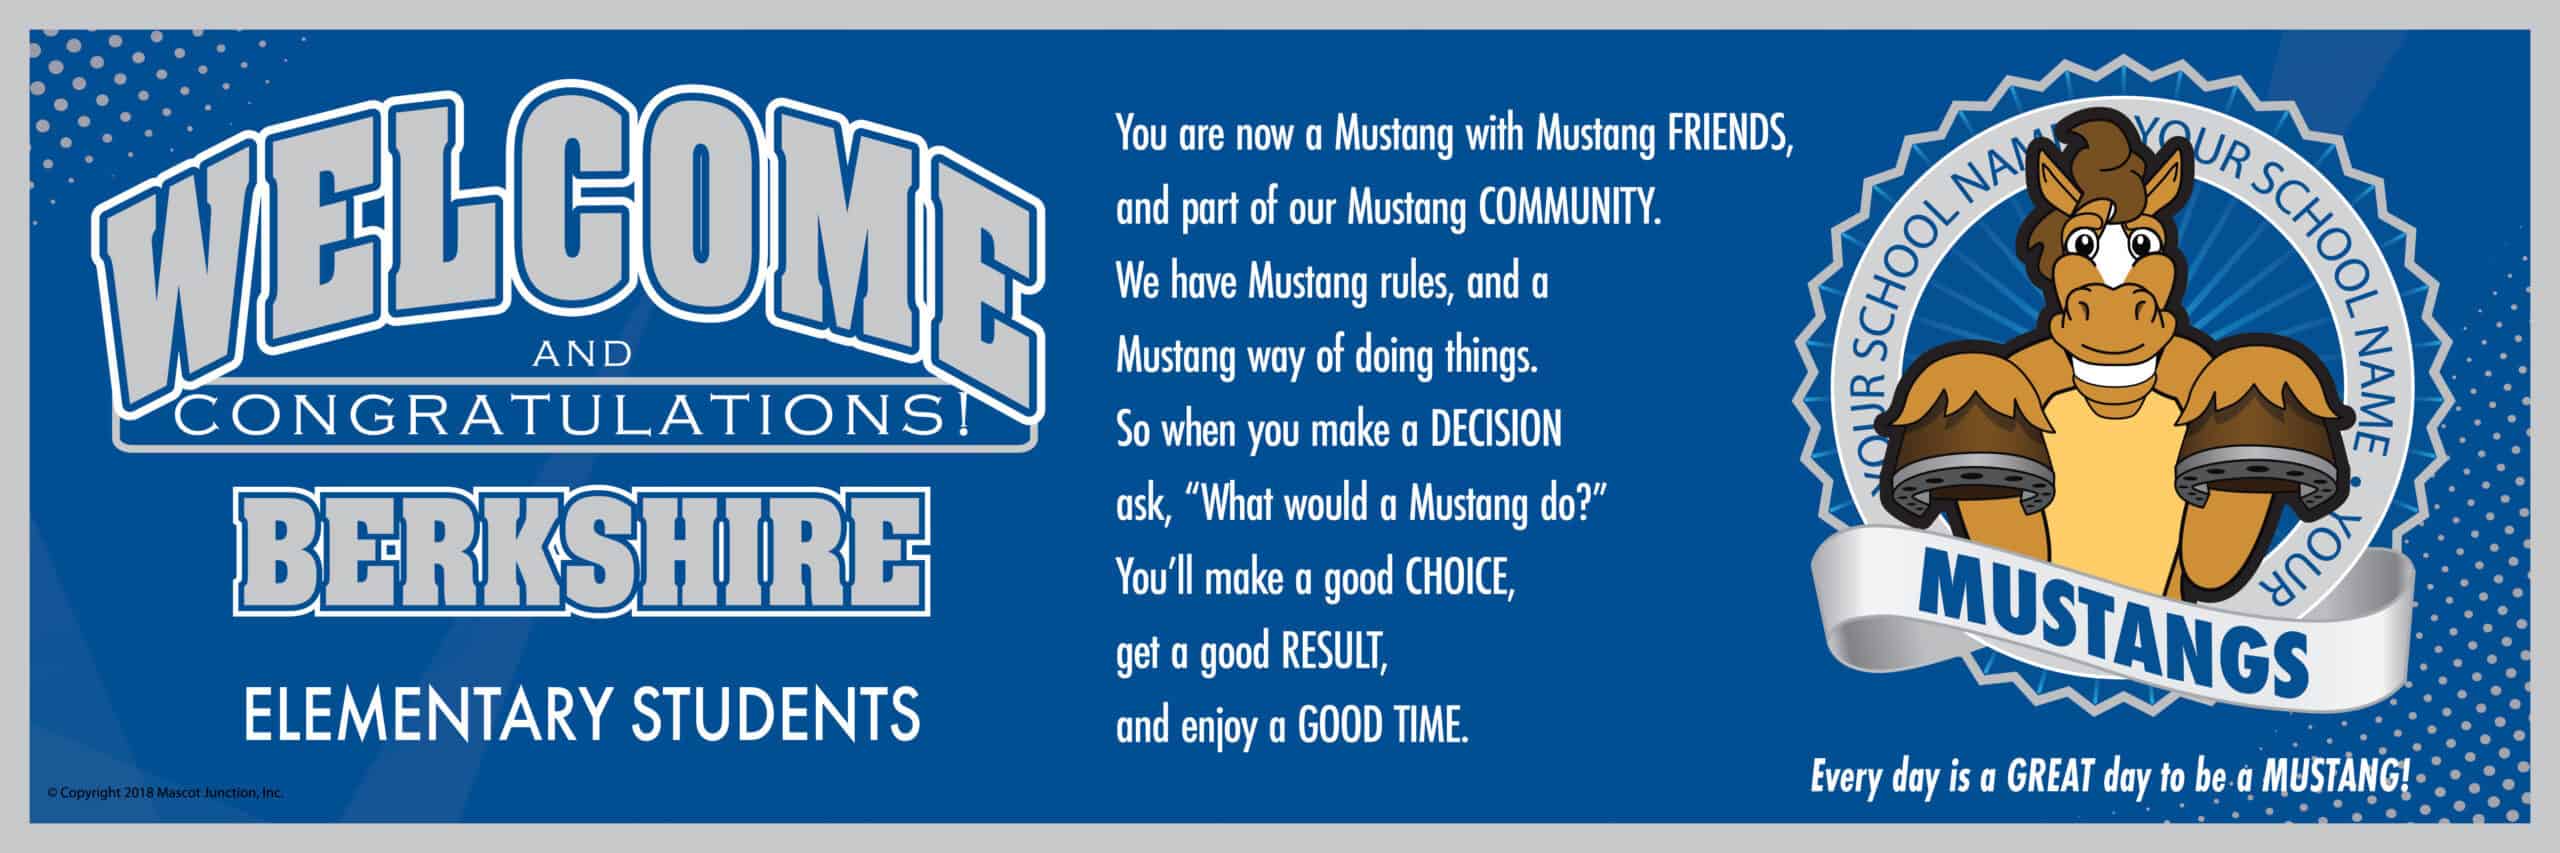 welcome-message-banner-mustang